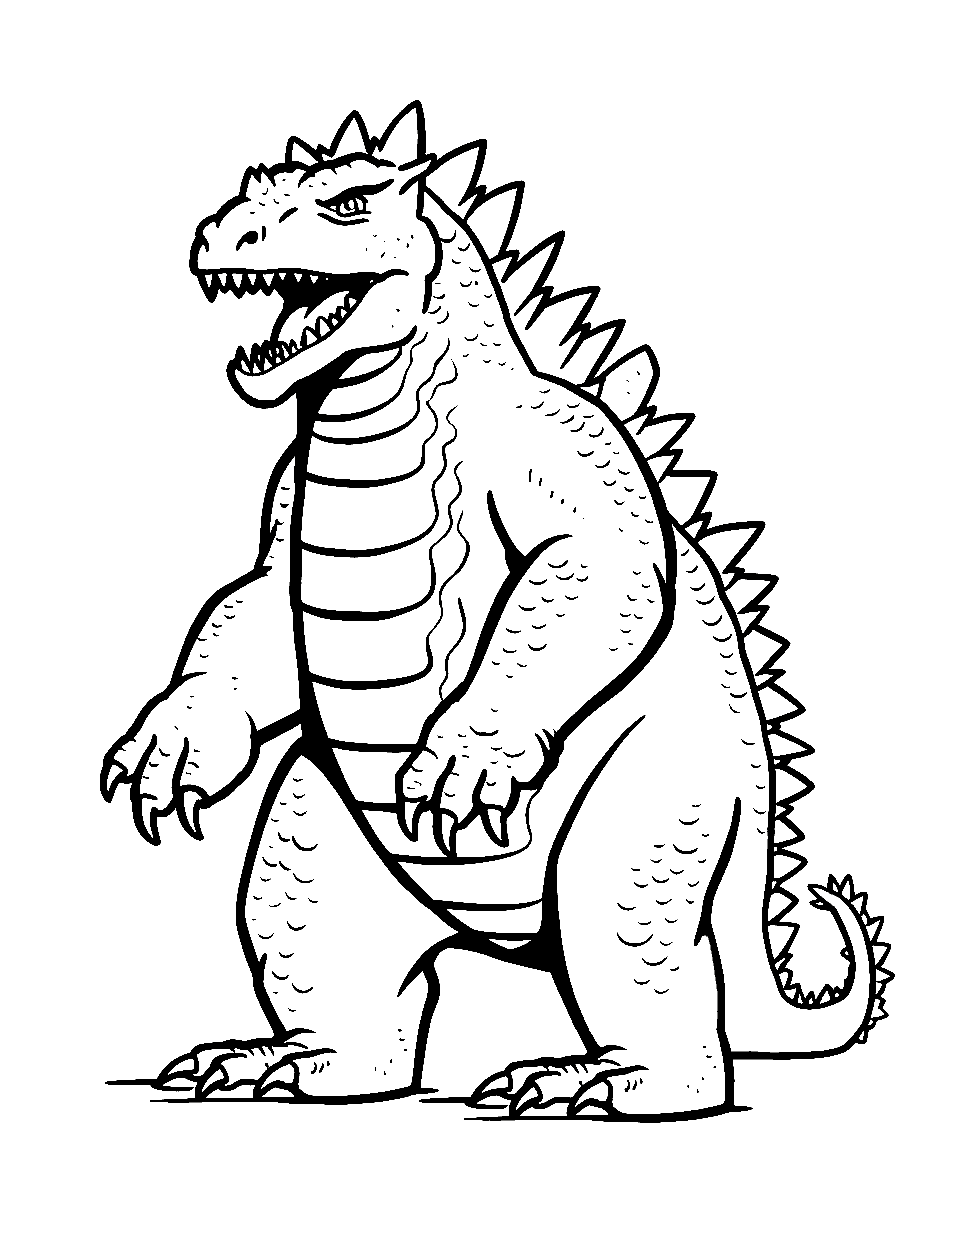 Easy Godzilla Outline Coloring Page - A basic outline of Godzilla, perfect for young children to fill in.